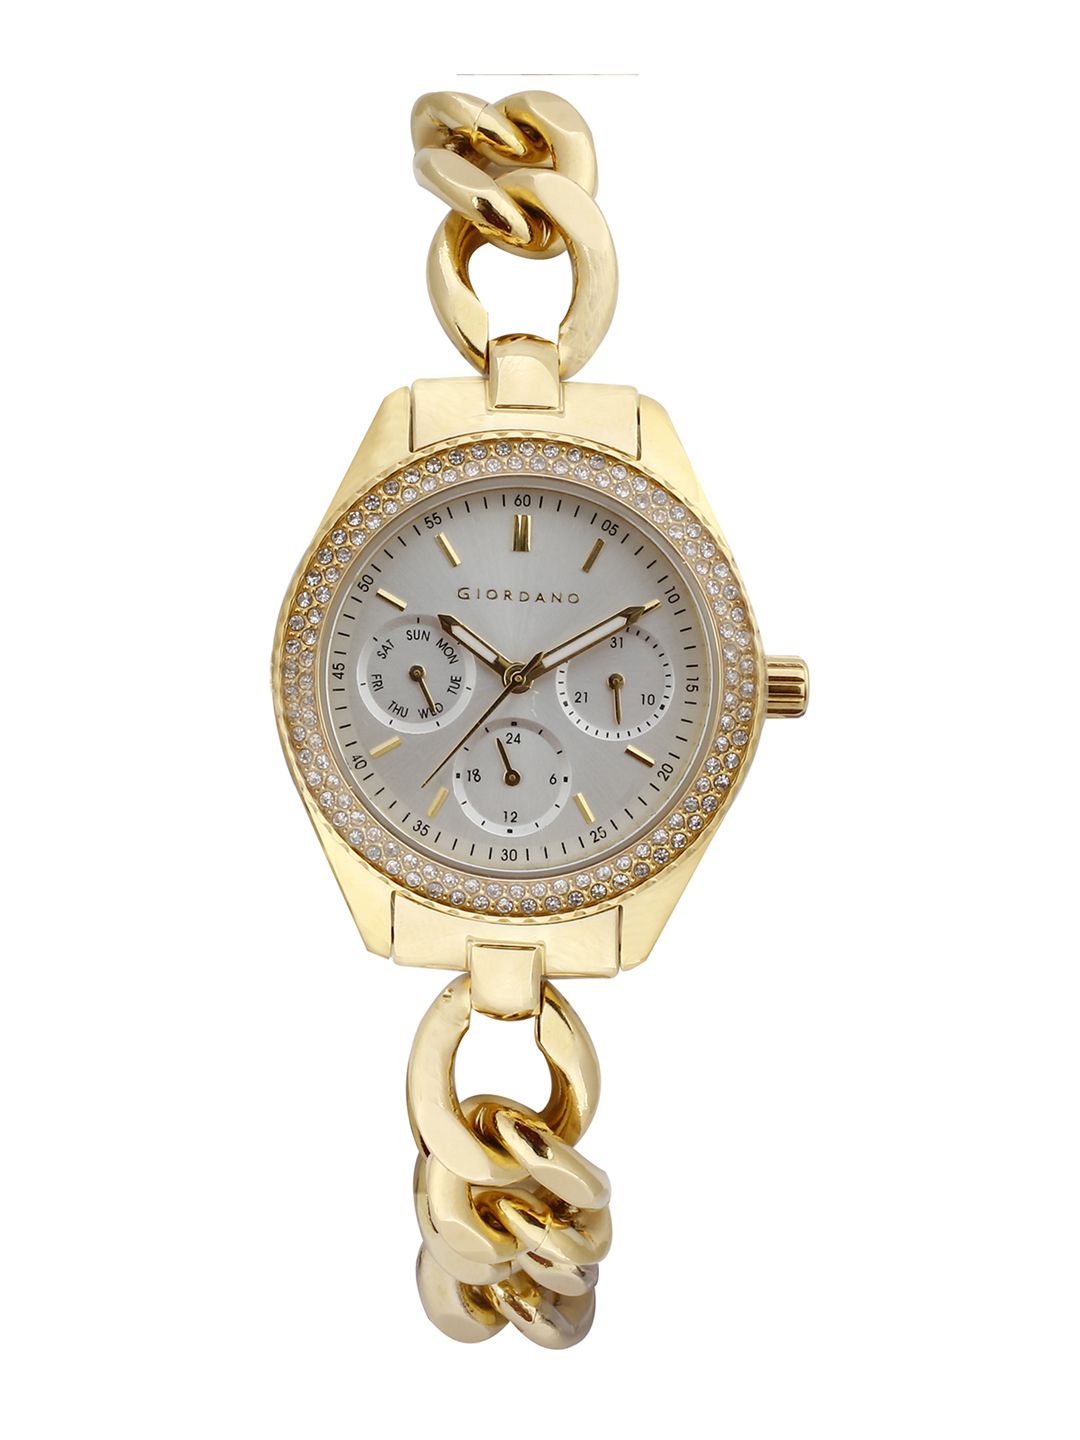 GIORDANO Women Gold-Toned Analogue Watch 2884-22 Price in India